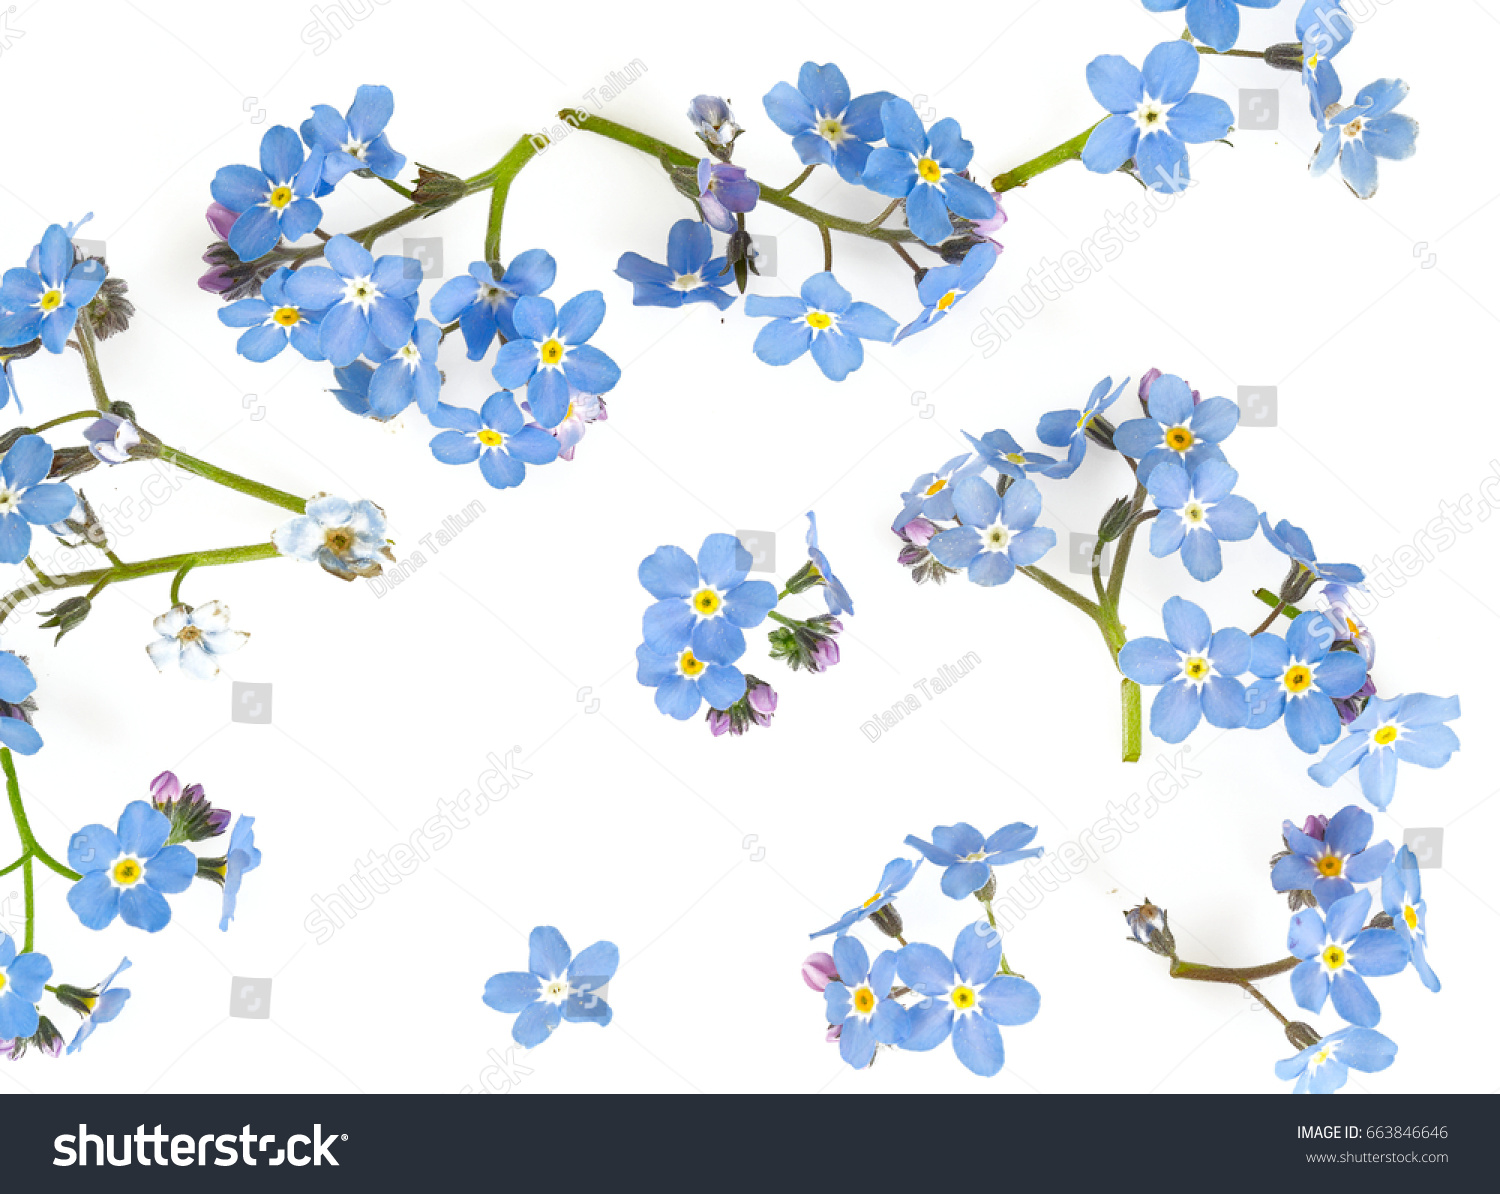 Forgetmenot Flower Isolated On White Stock Photo (Edit Now) 663846646